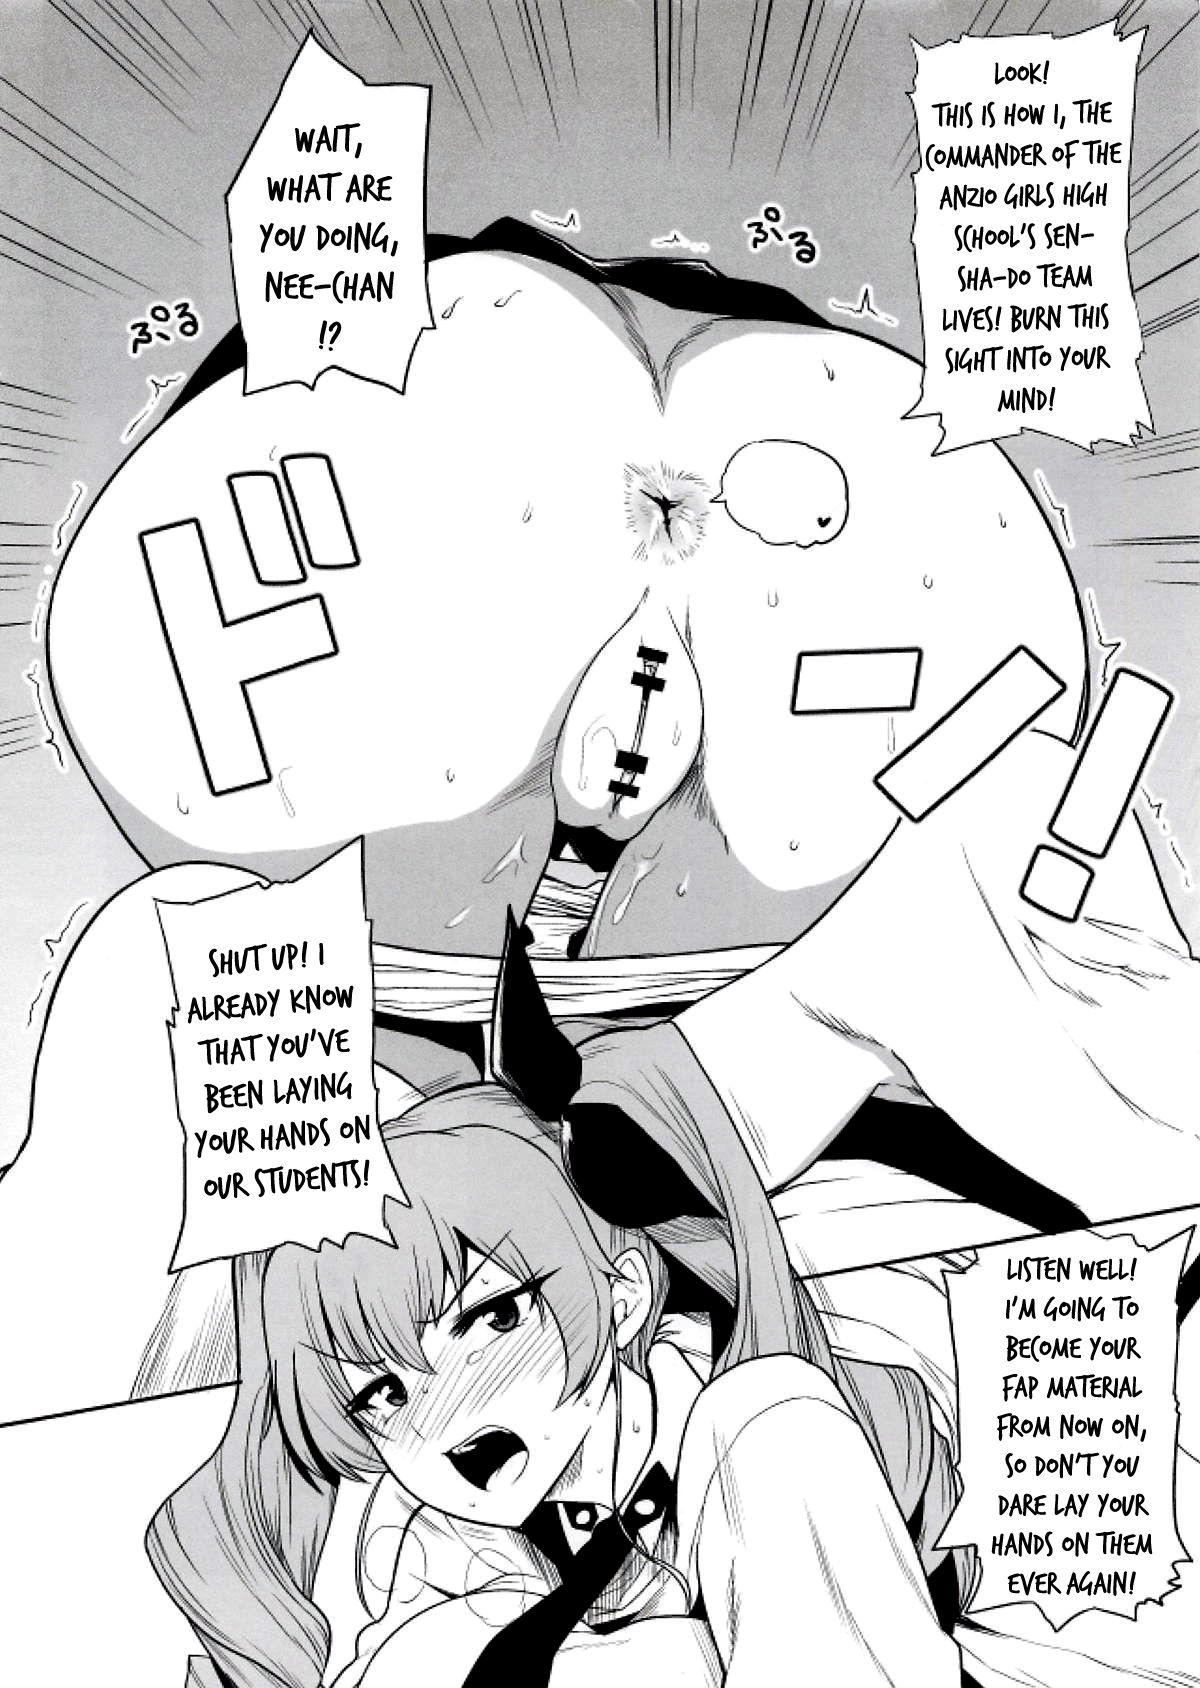 Creampies Raise wa Duce no Otouto ni Naritai | I Want To Become Duce's Little Brother In The Future! - Girls und panzer Groupfuck - Page 10